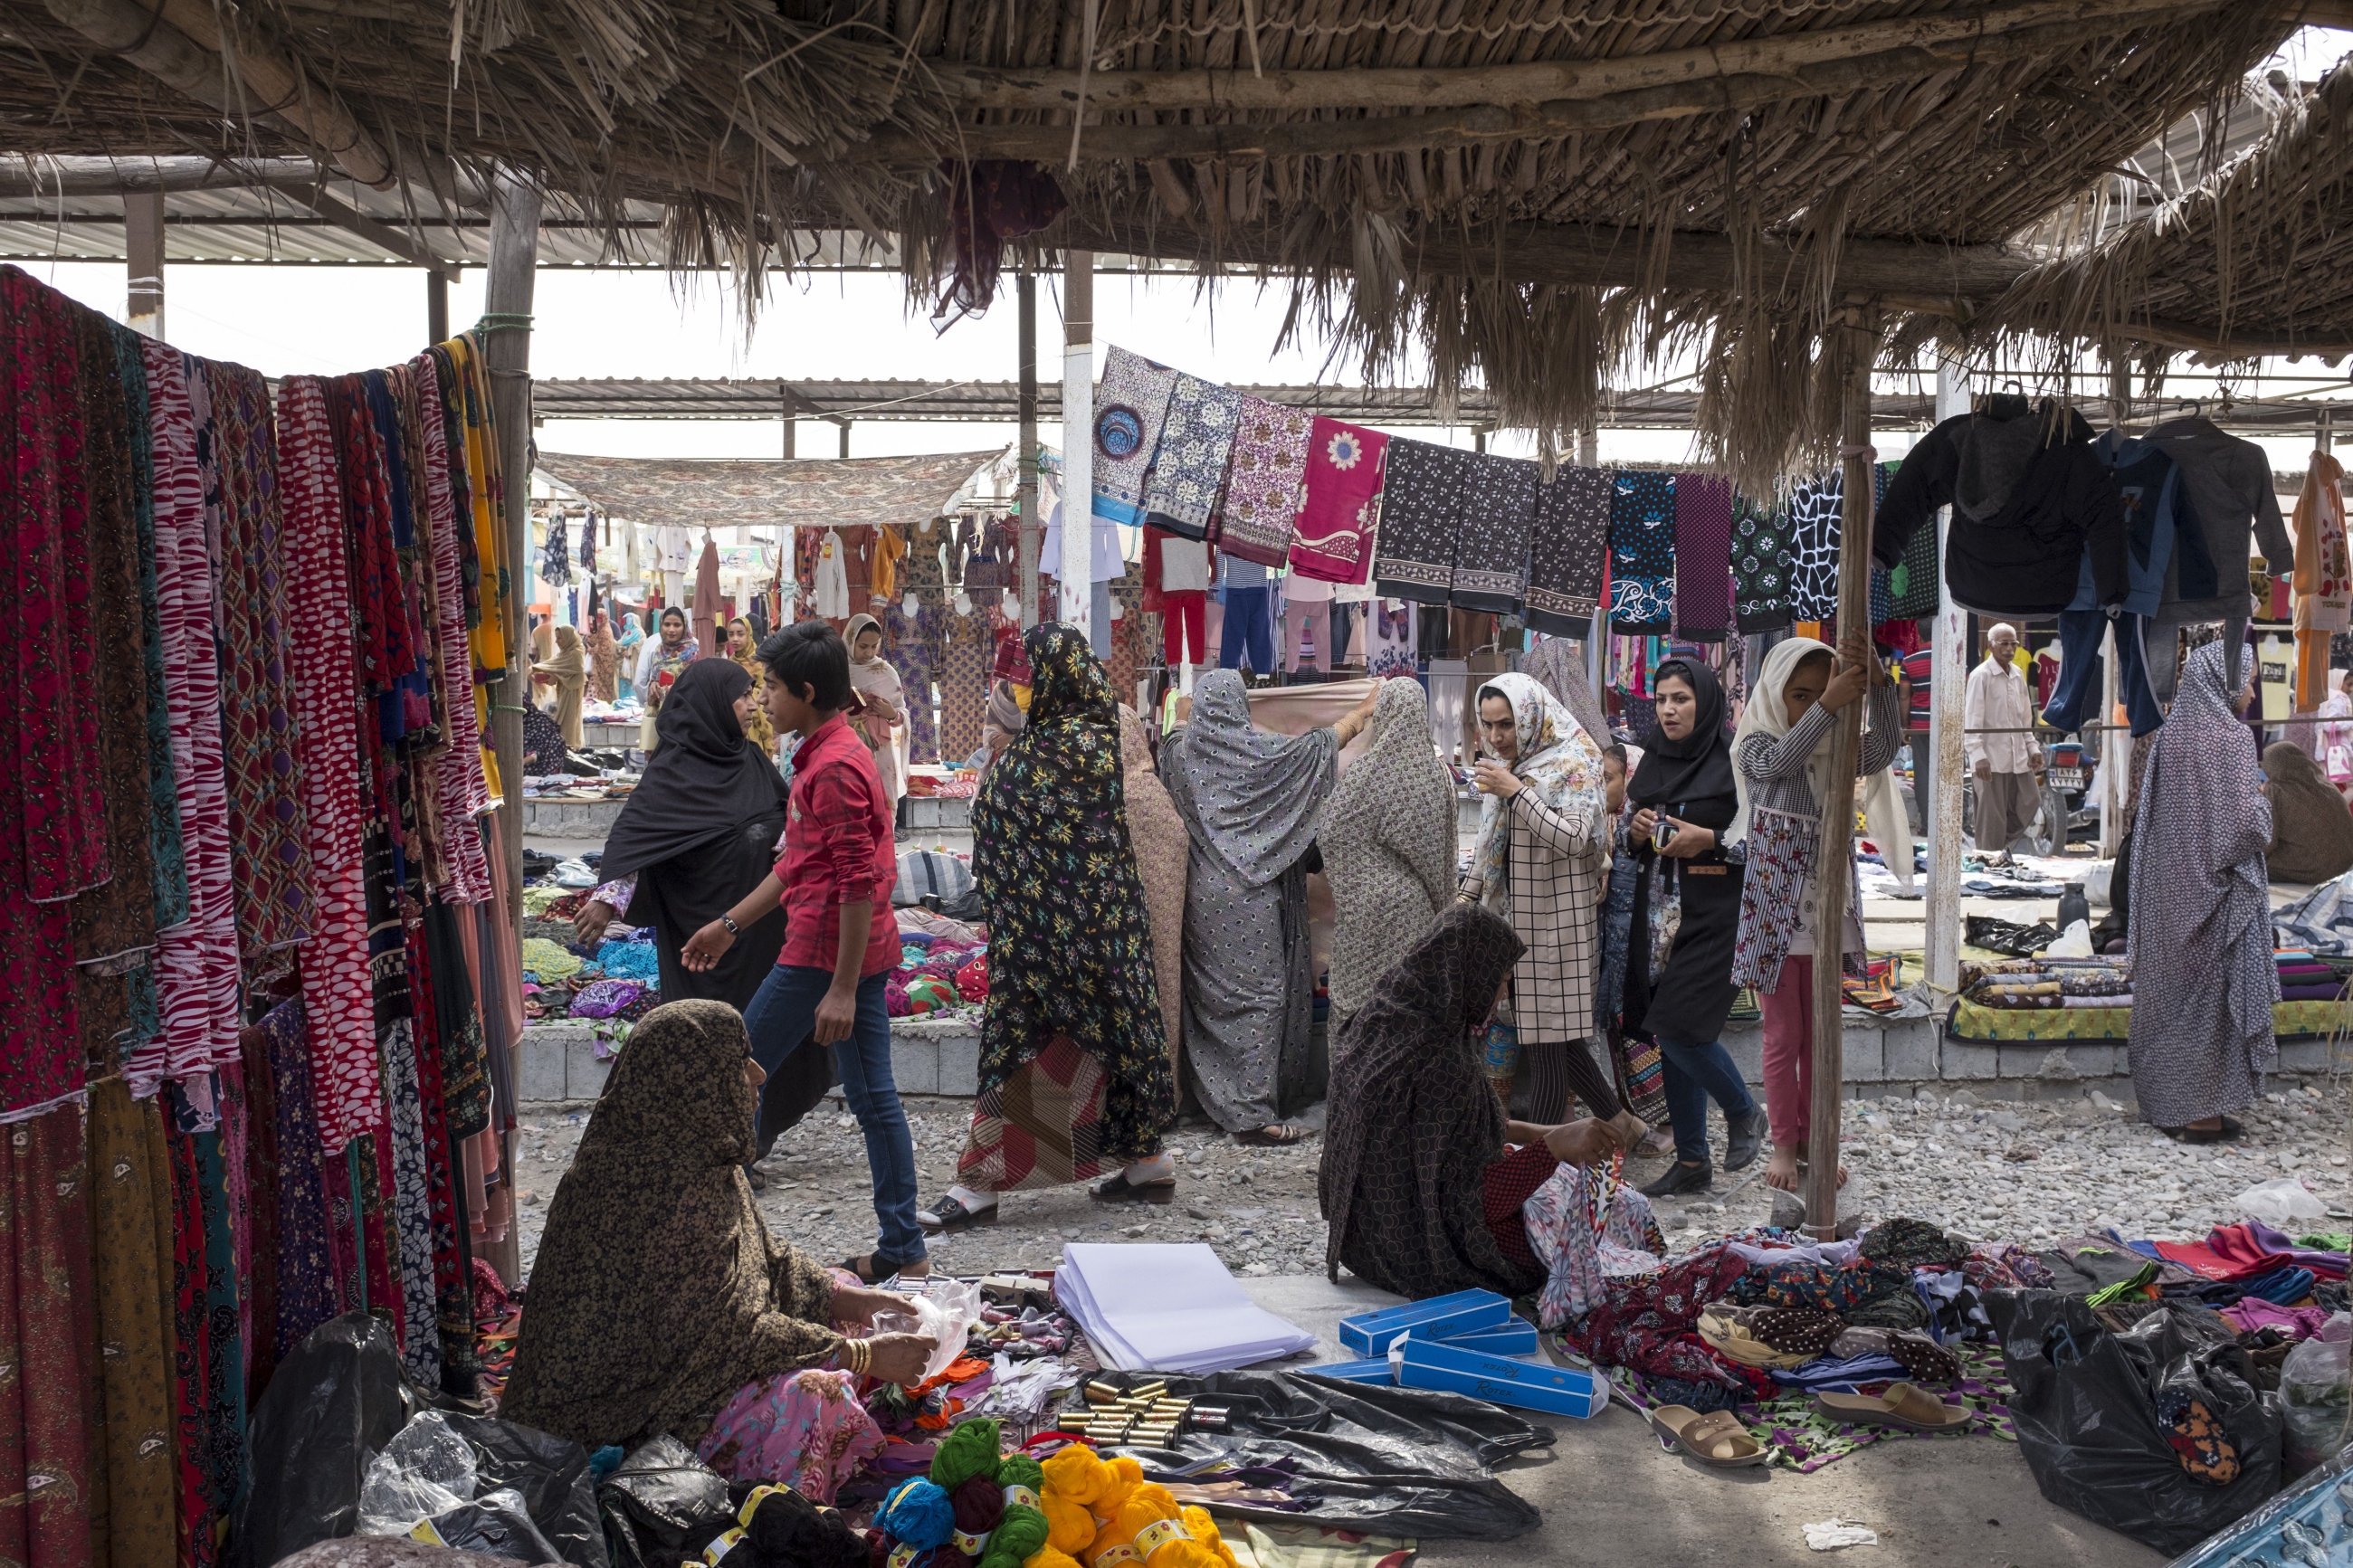 The Panjshambe bazaar is also where women can buy and sell masks. The majority there are masked as they conduct their business without male escorts (MEE)